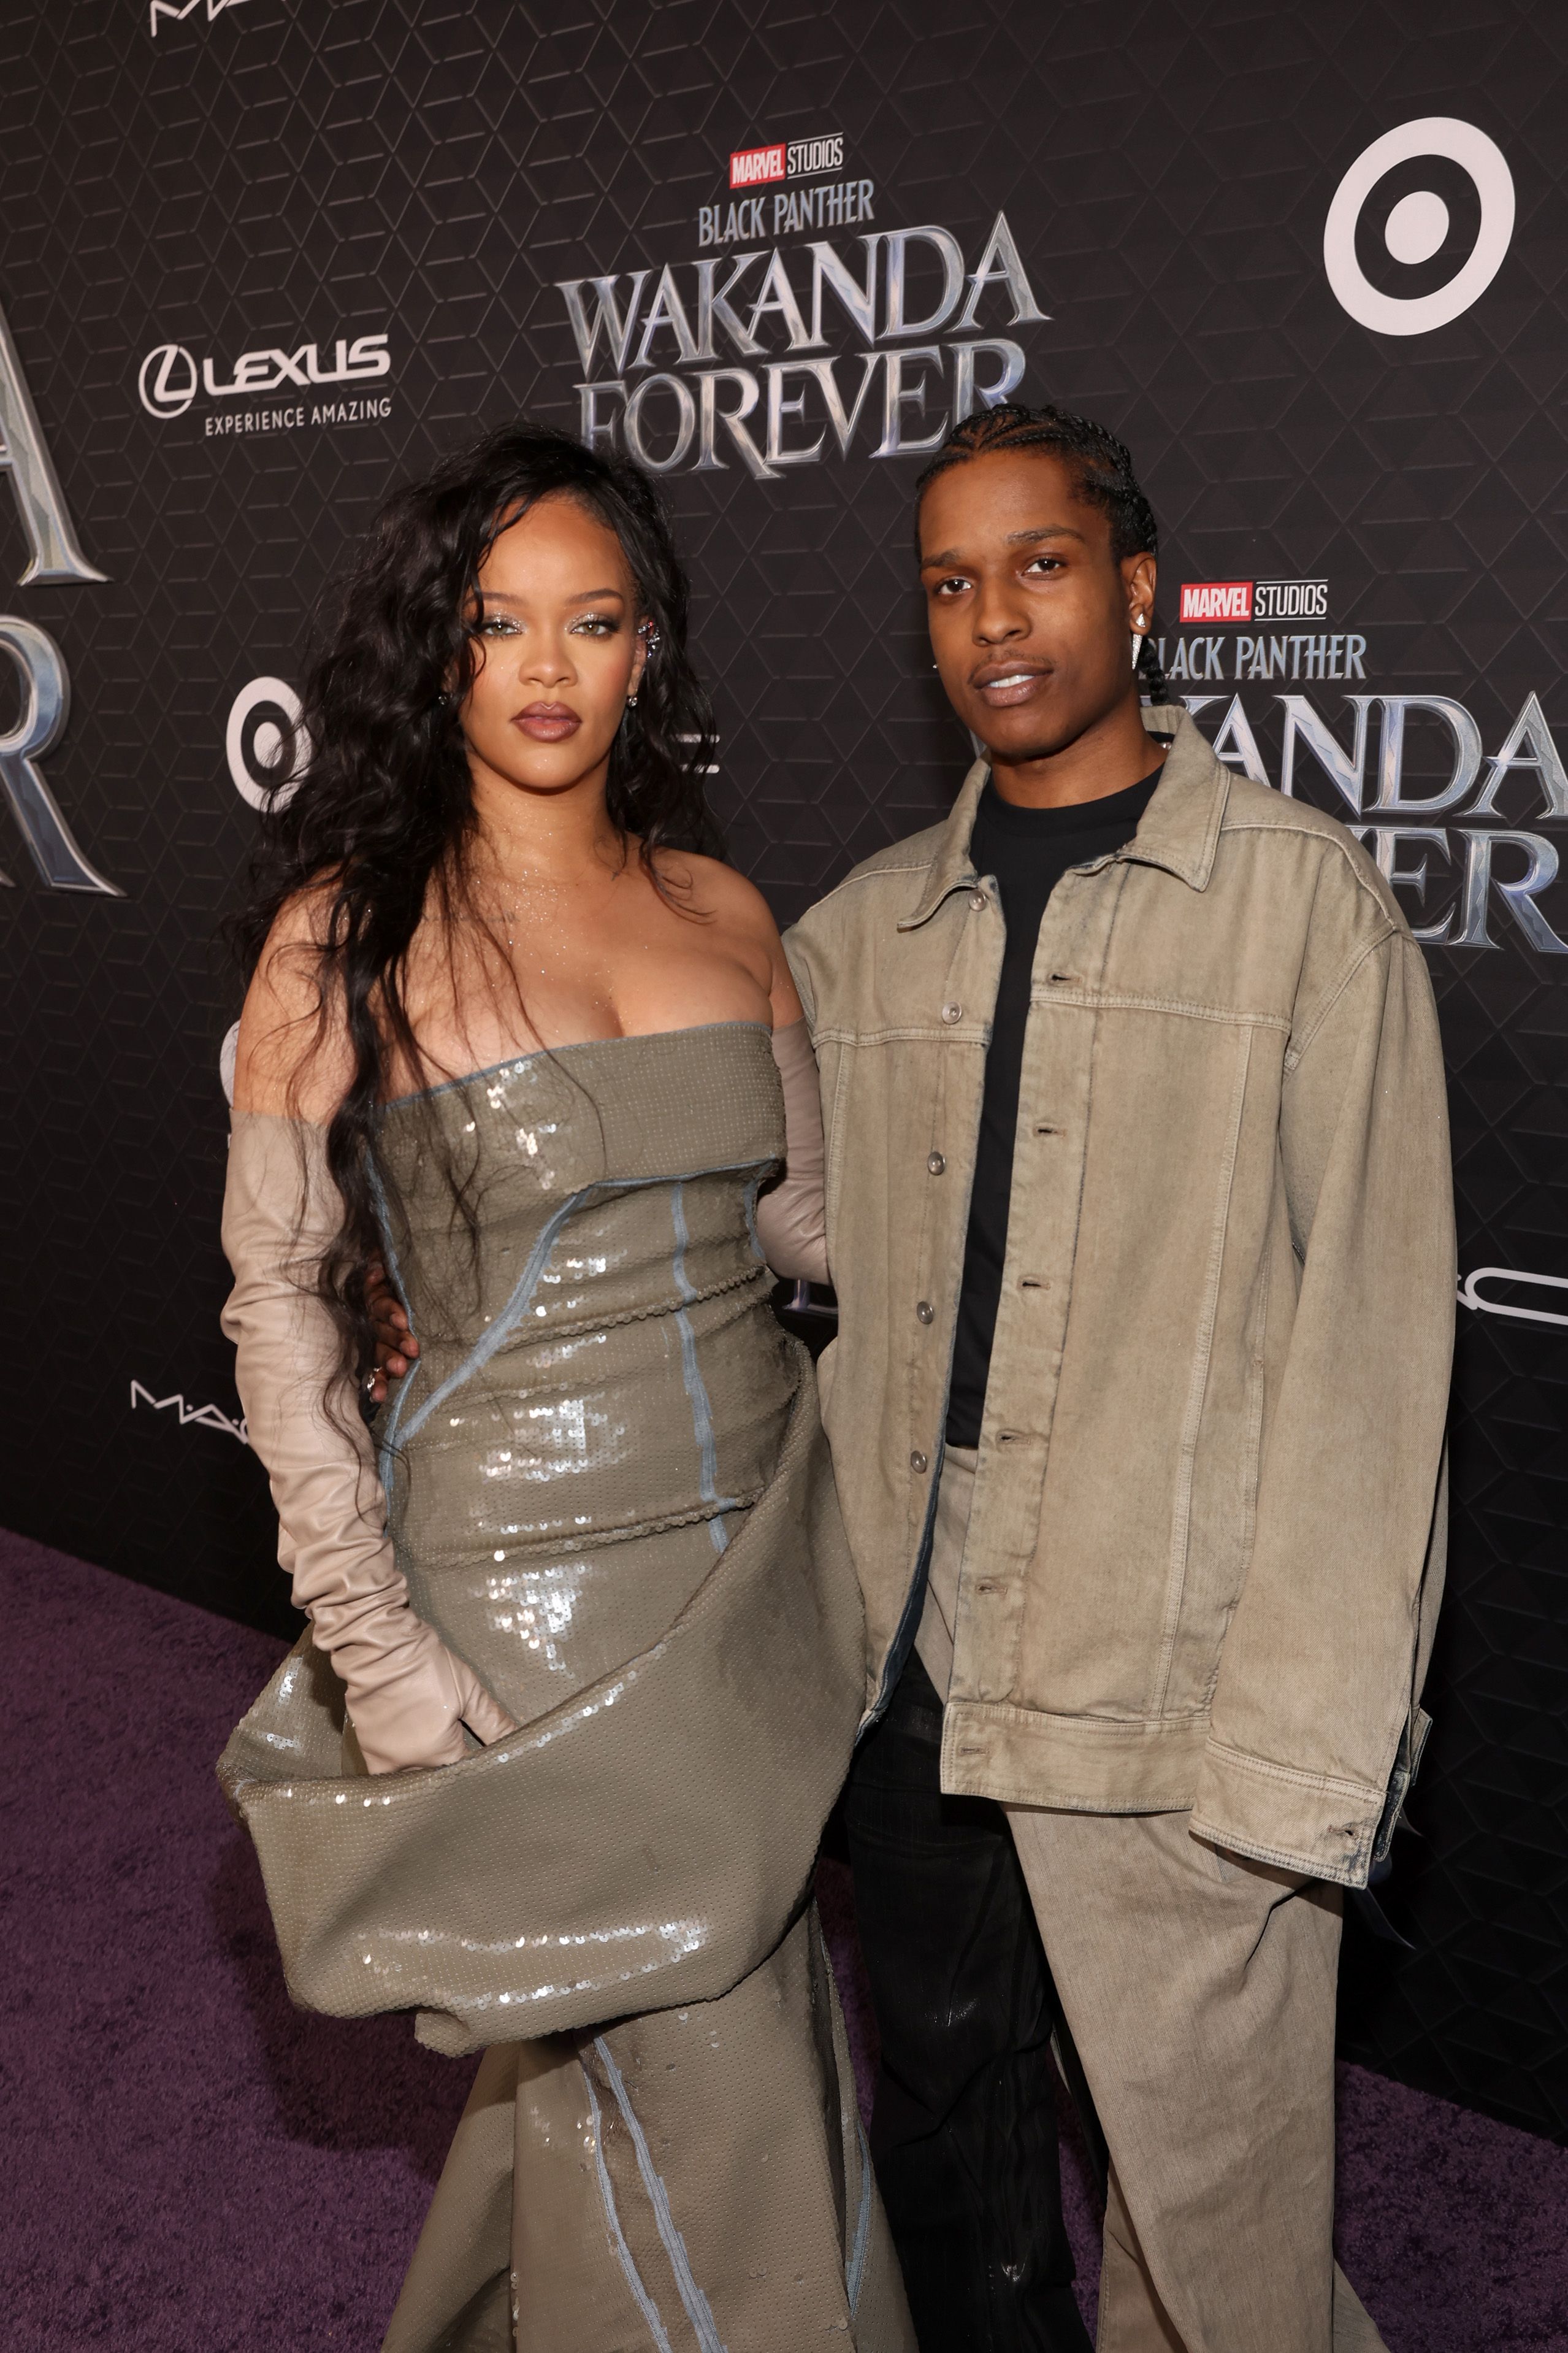 Rihanna and A$AP Rocky attending the Black Panther: Wakanda Forever World Premiere in October 2022